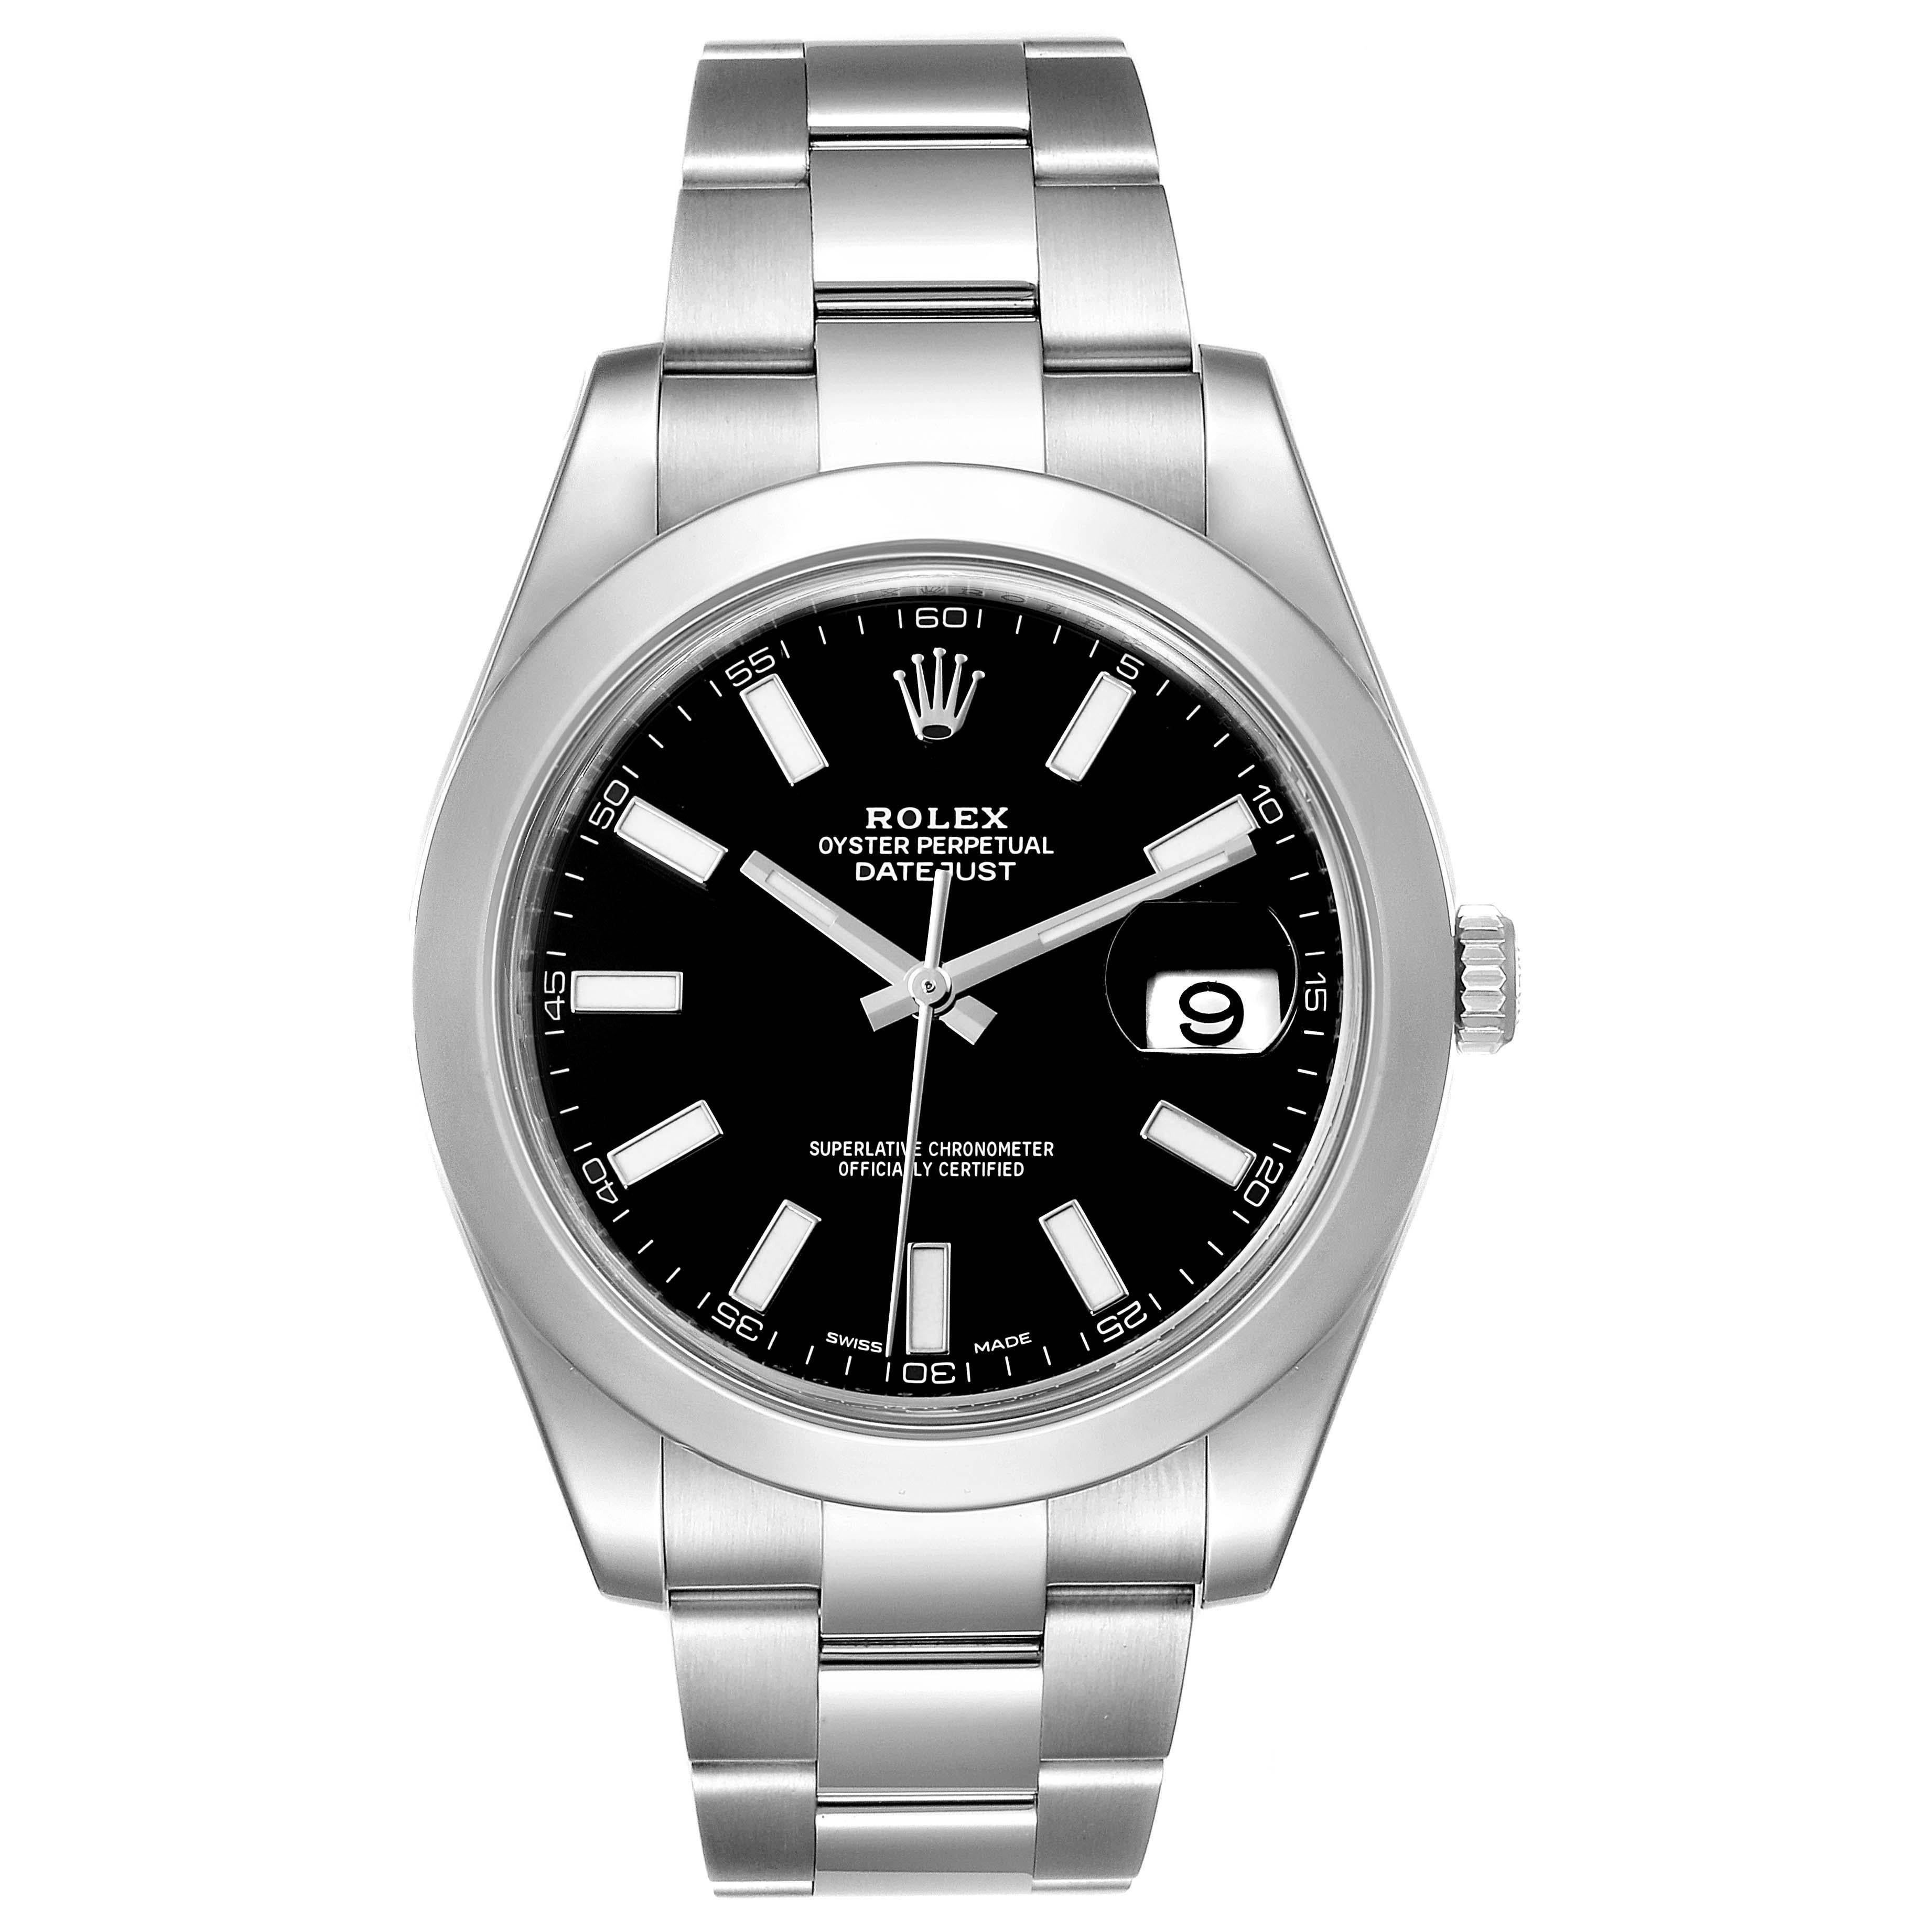 Rolex Datejust II 41mm Black Dial Steel Mens Watch 116300 Box Papers. Officially certified chronometer self-winding movement. Stainless steel case 41 mm in diameter. Rolex logo on a crown. Stainless steel smooth bezel. Scratch resistant sapphire